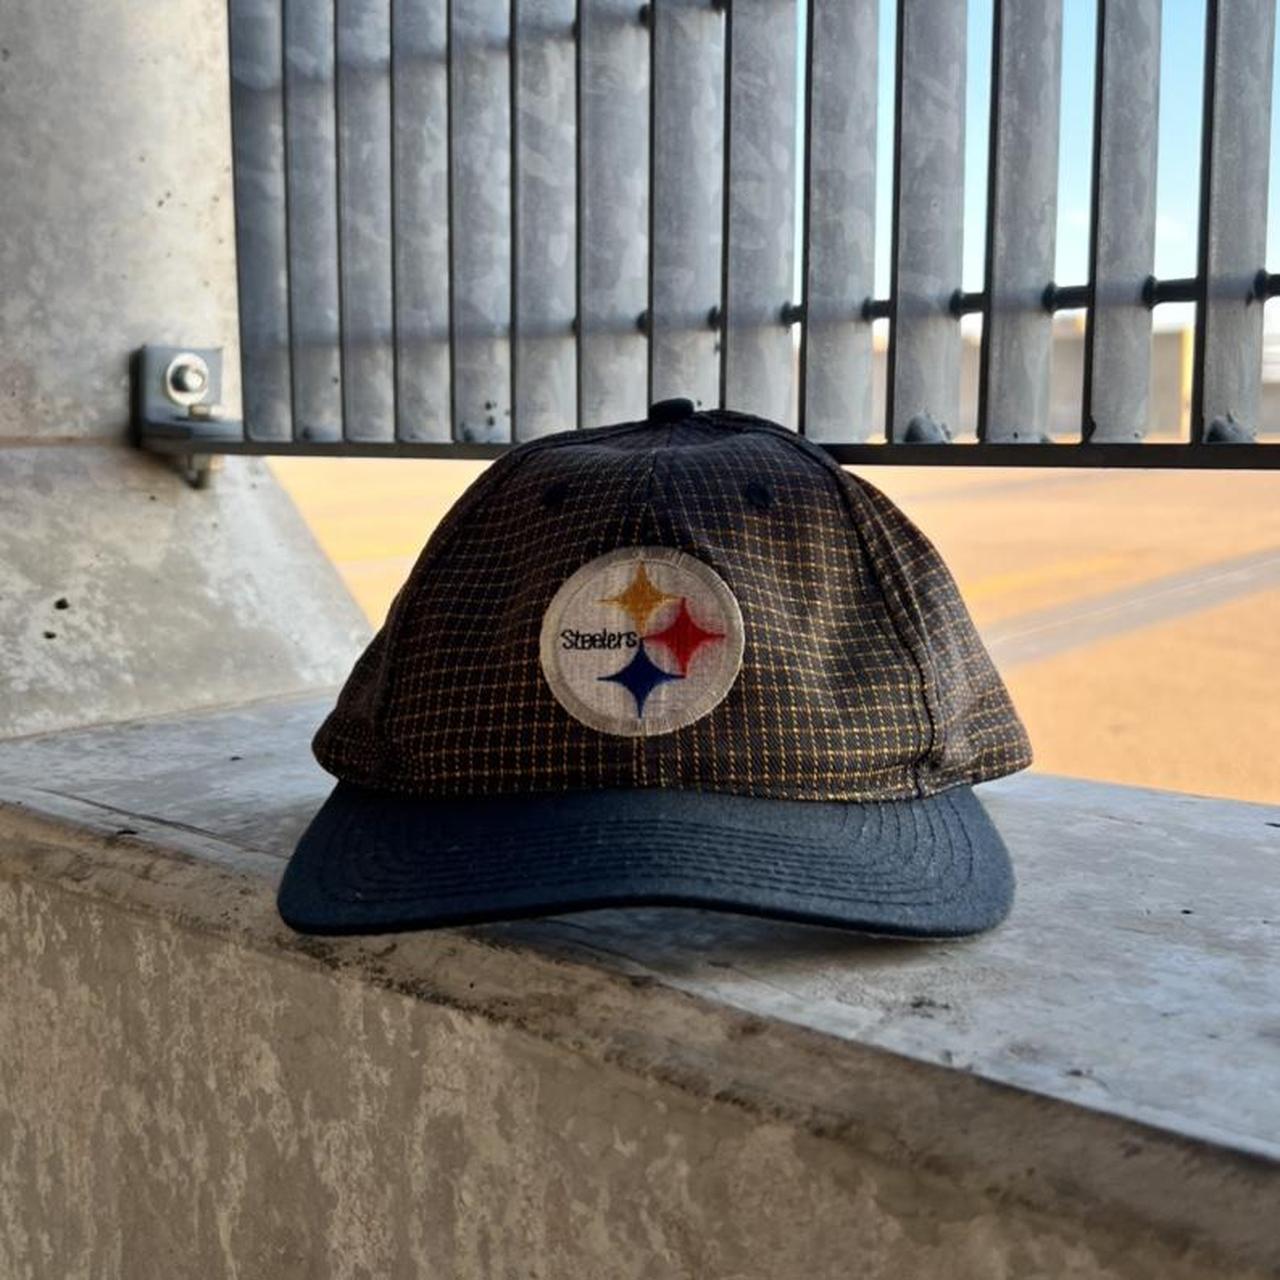 old steelers hat